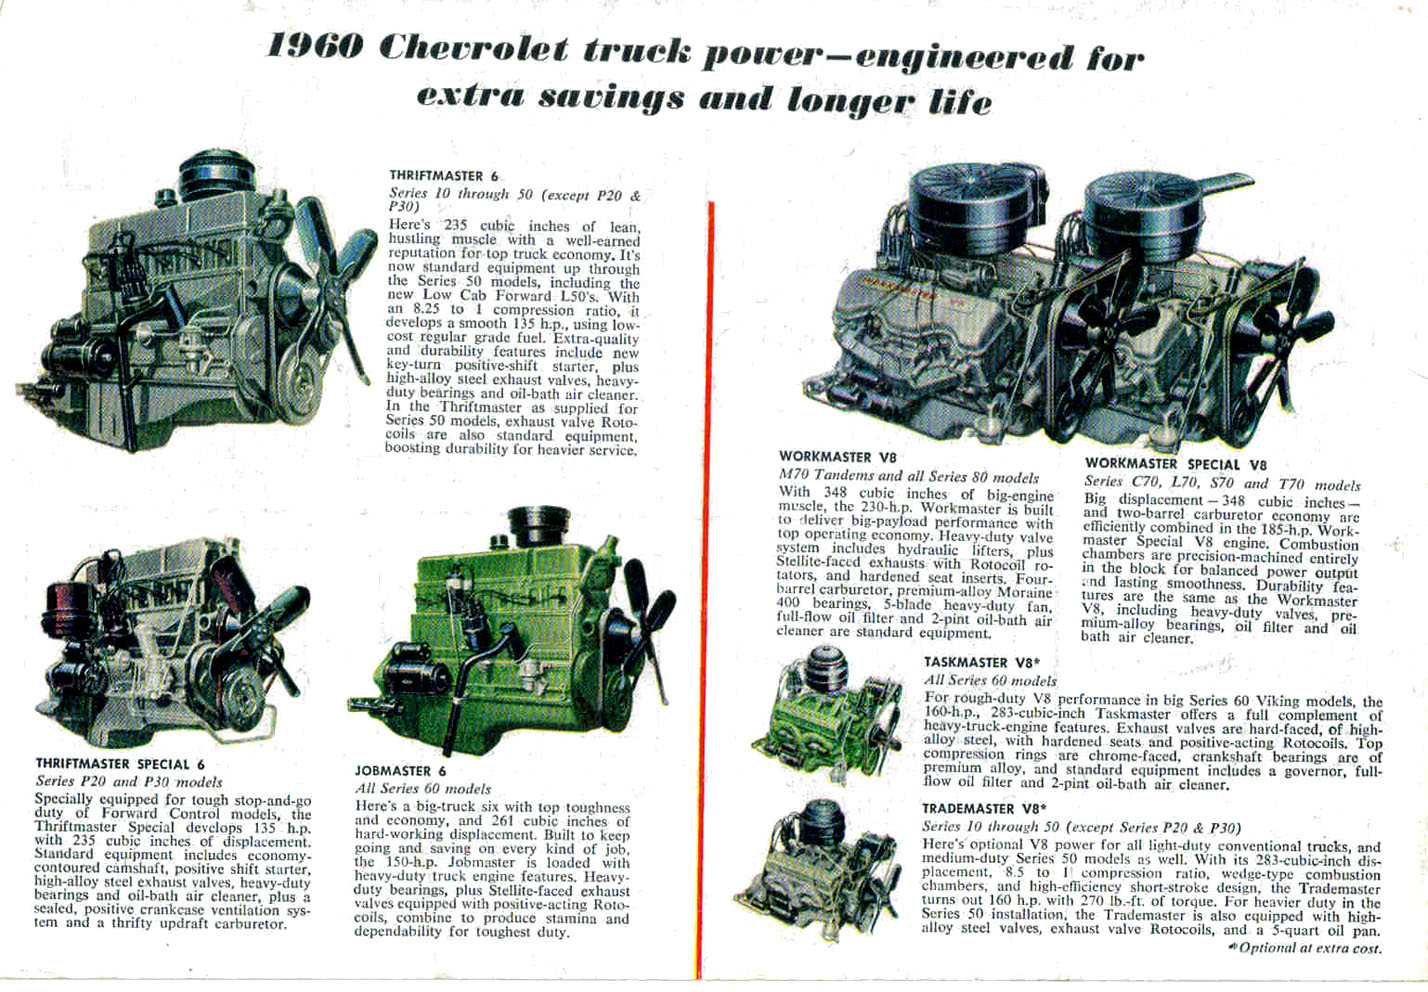 1960 Chevrolet Truck Foldout Page 6